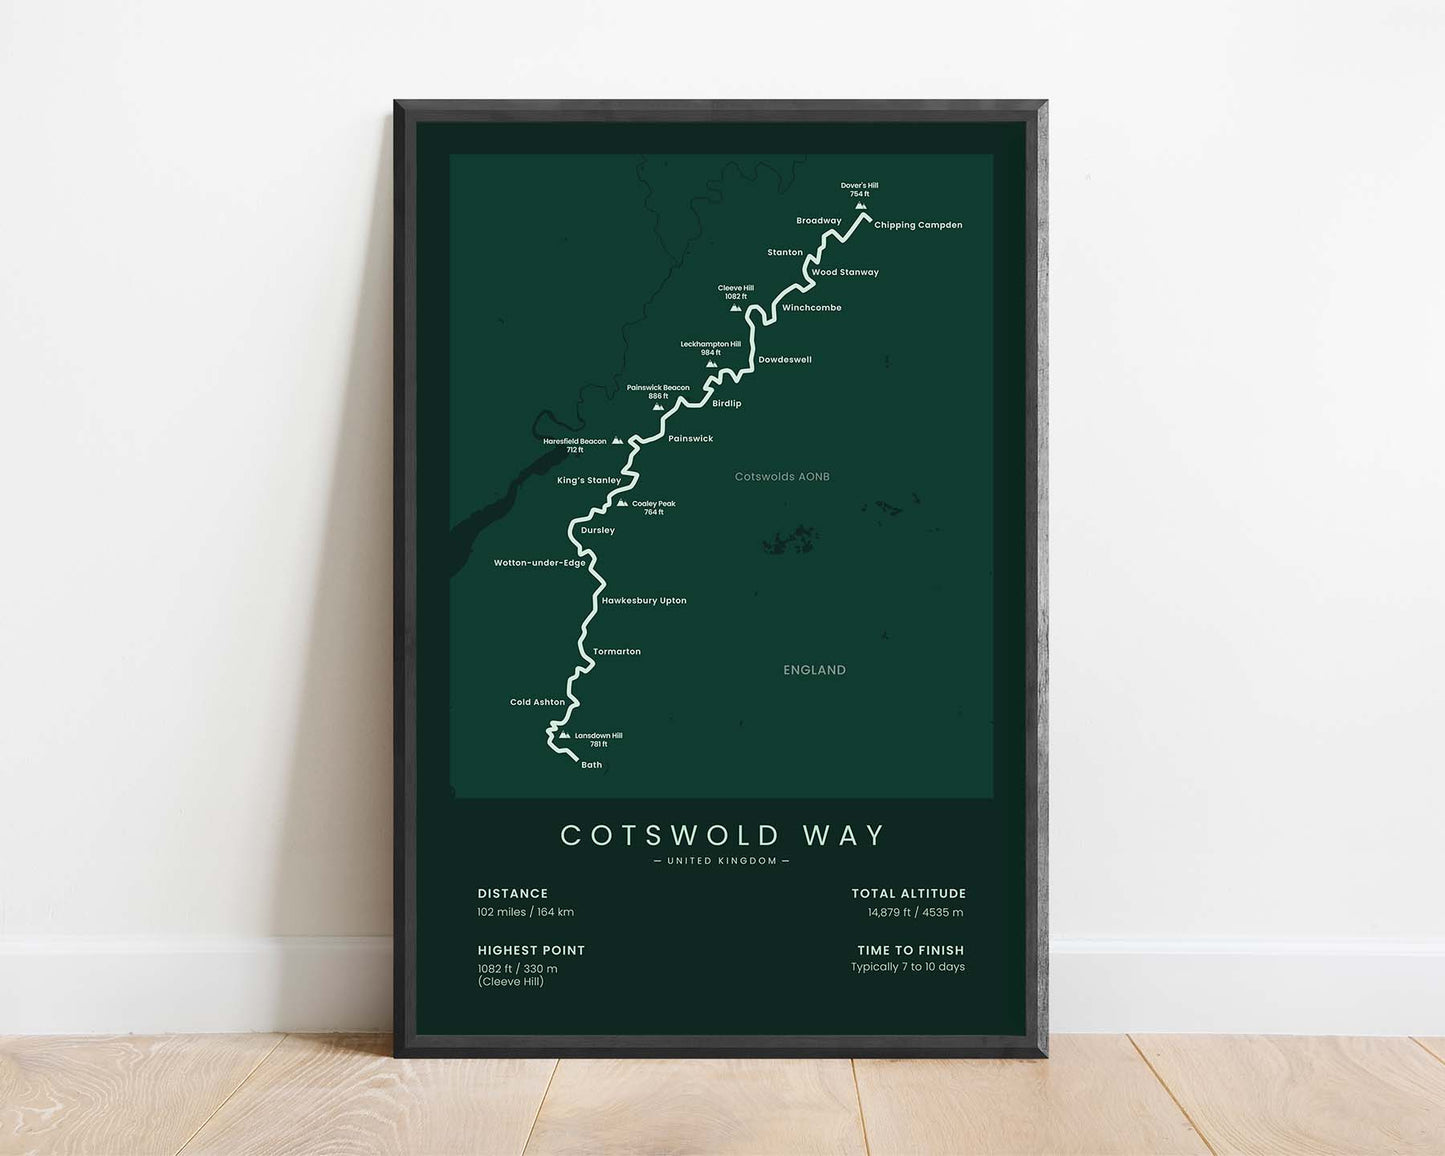 Cotswold Way National Trail (Chipping Campden to Bath, United Kingdom, Cotswolds AONB, England) Trek Map Art with Green Background